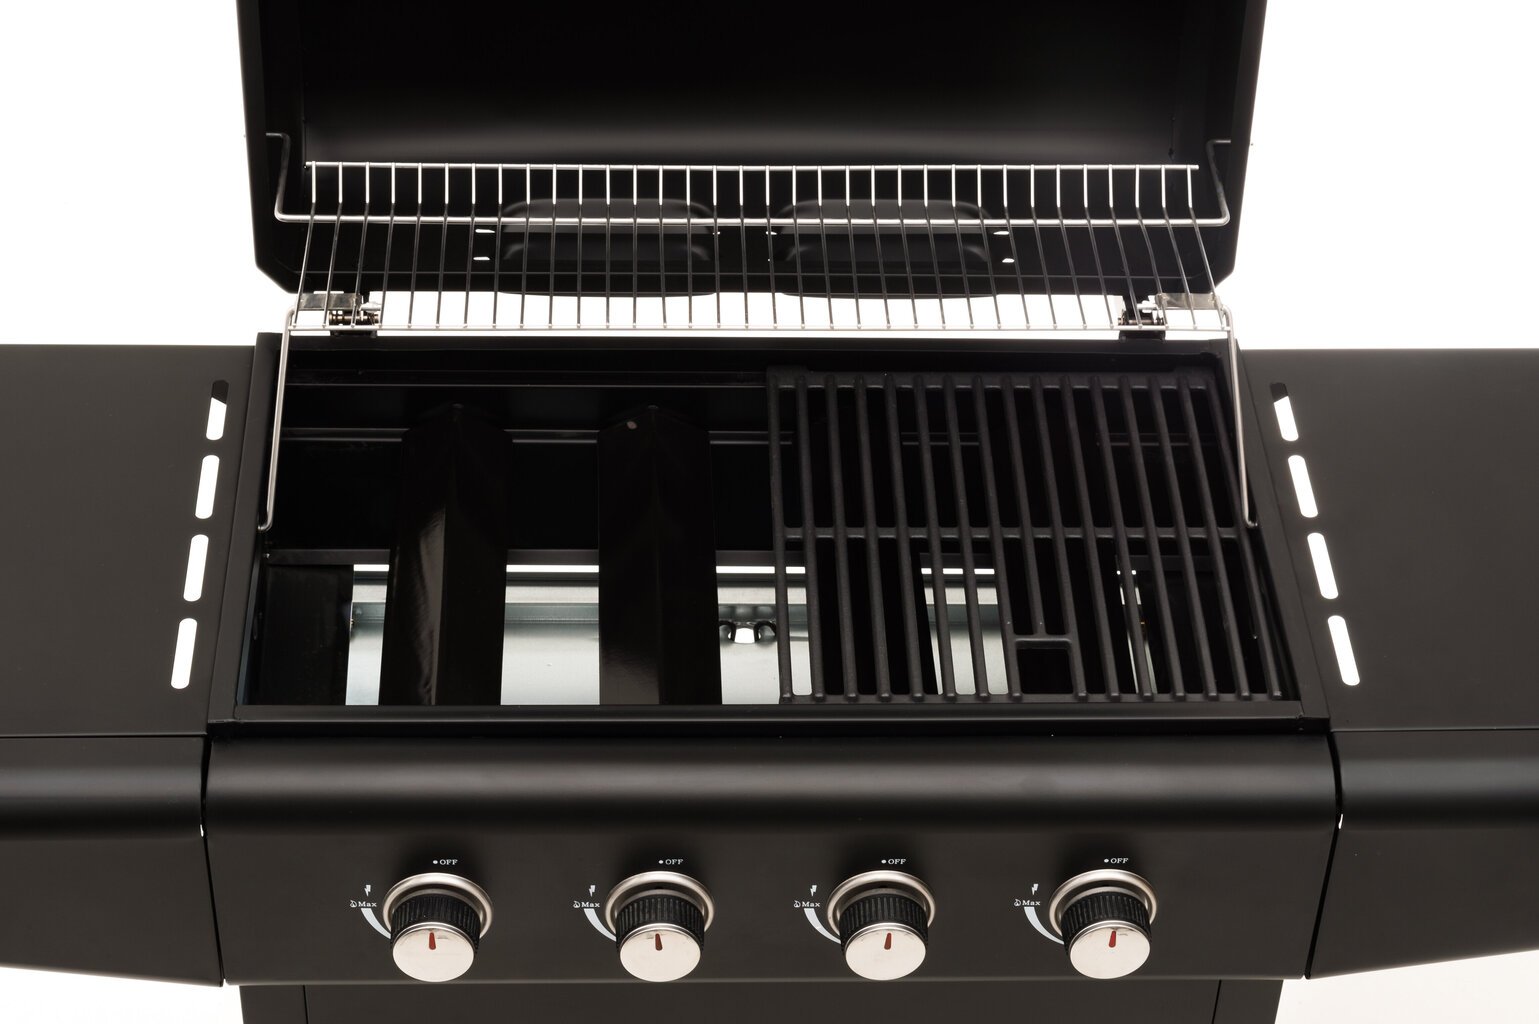 Grill Mustang Gas Albany 4 hind ja info | Grillid | hansapost.ee